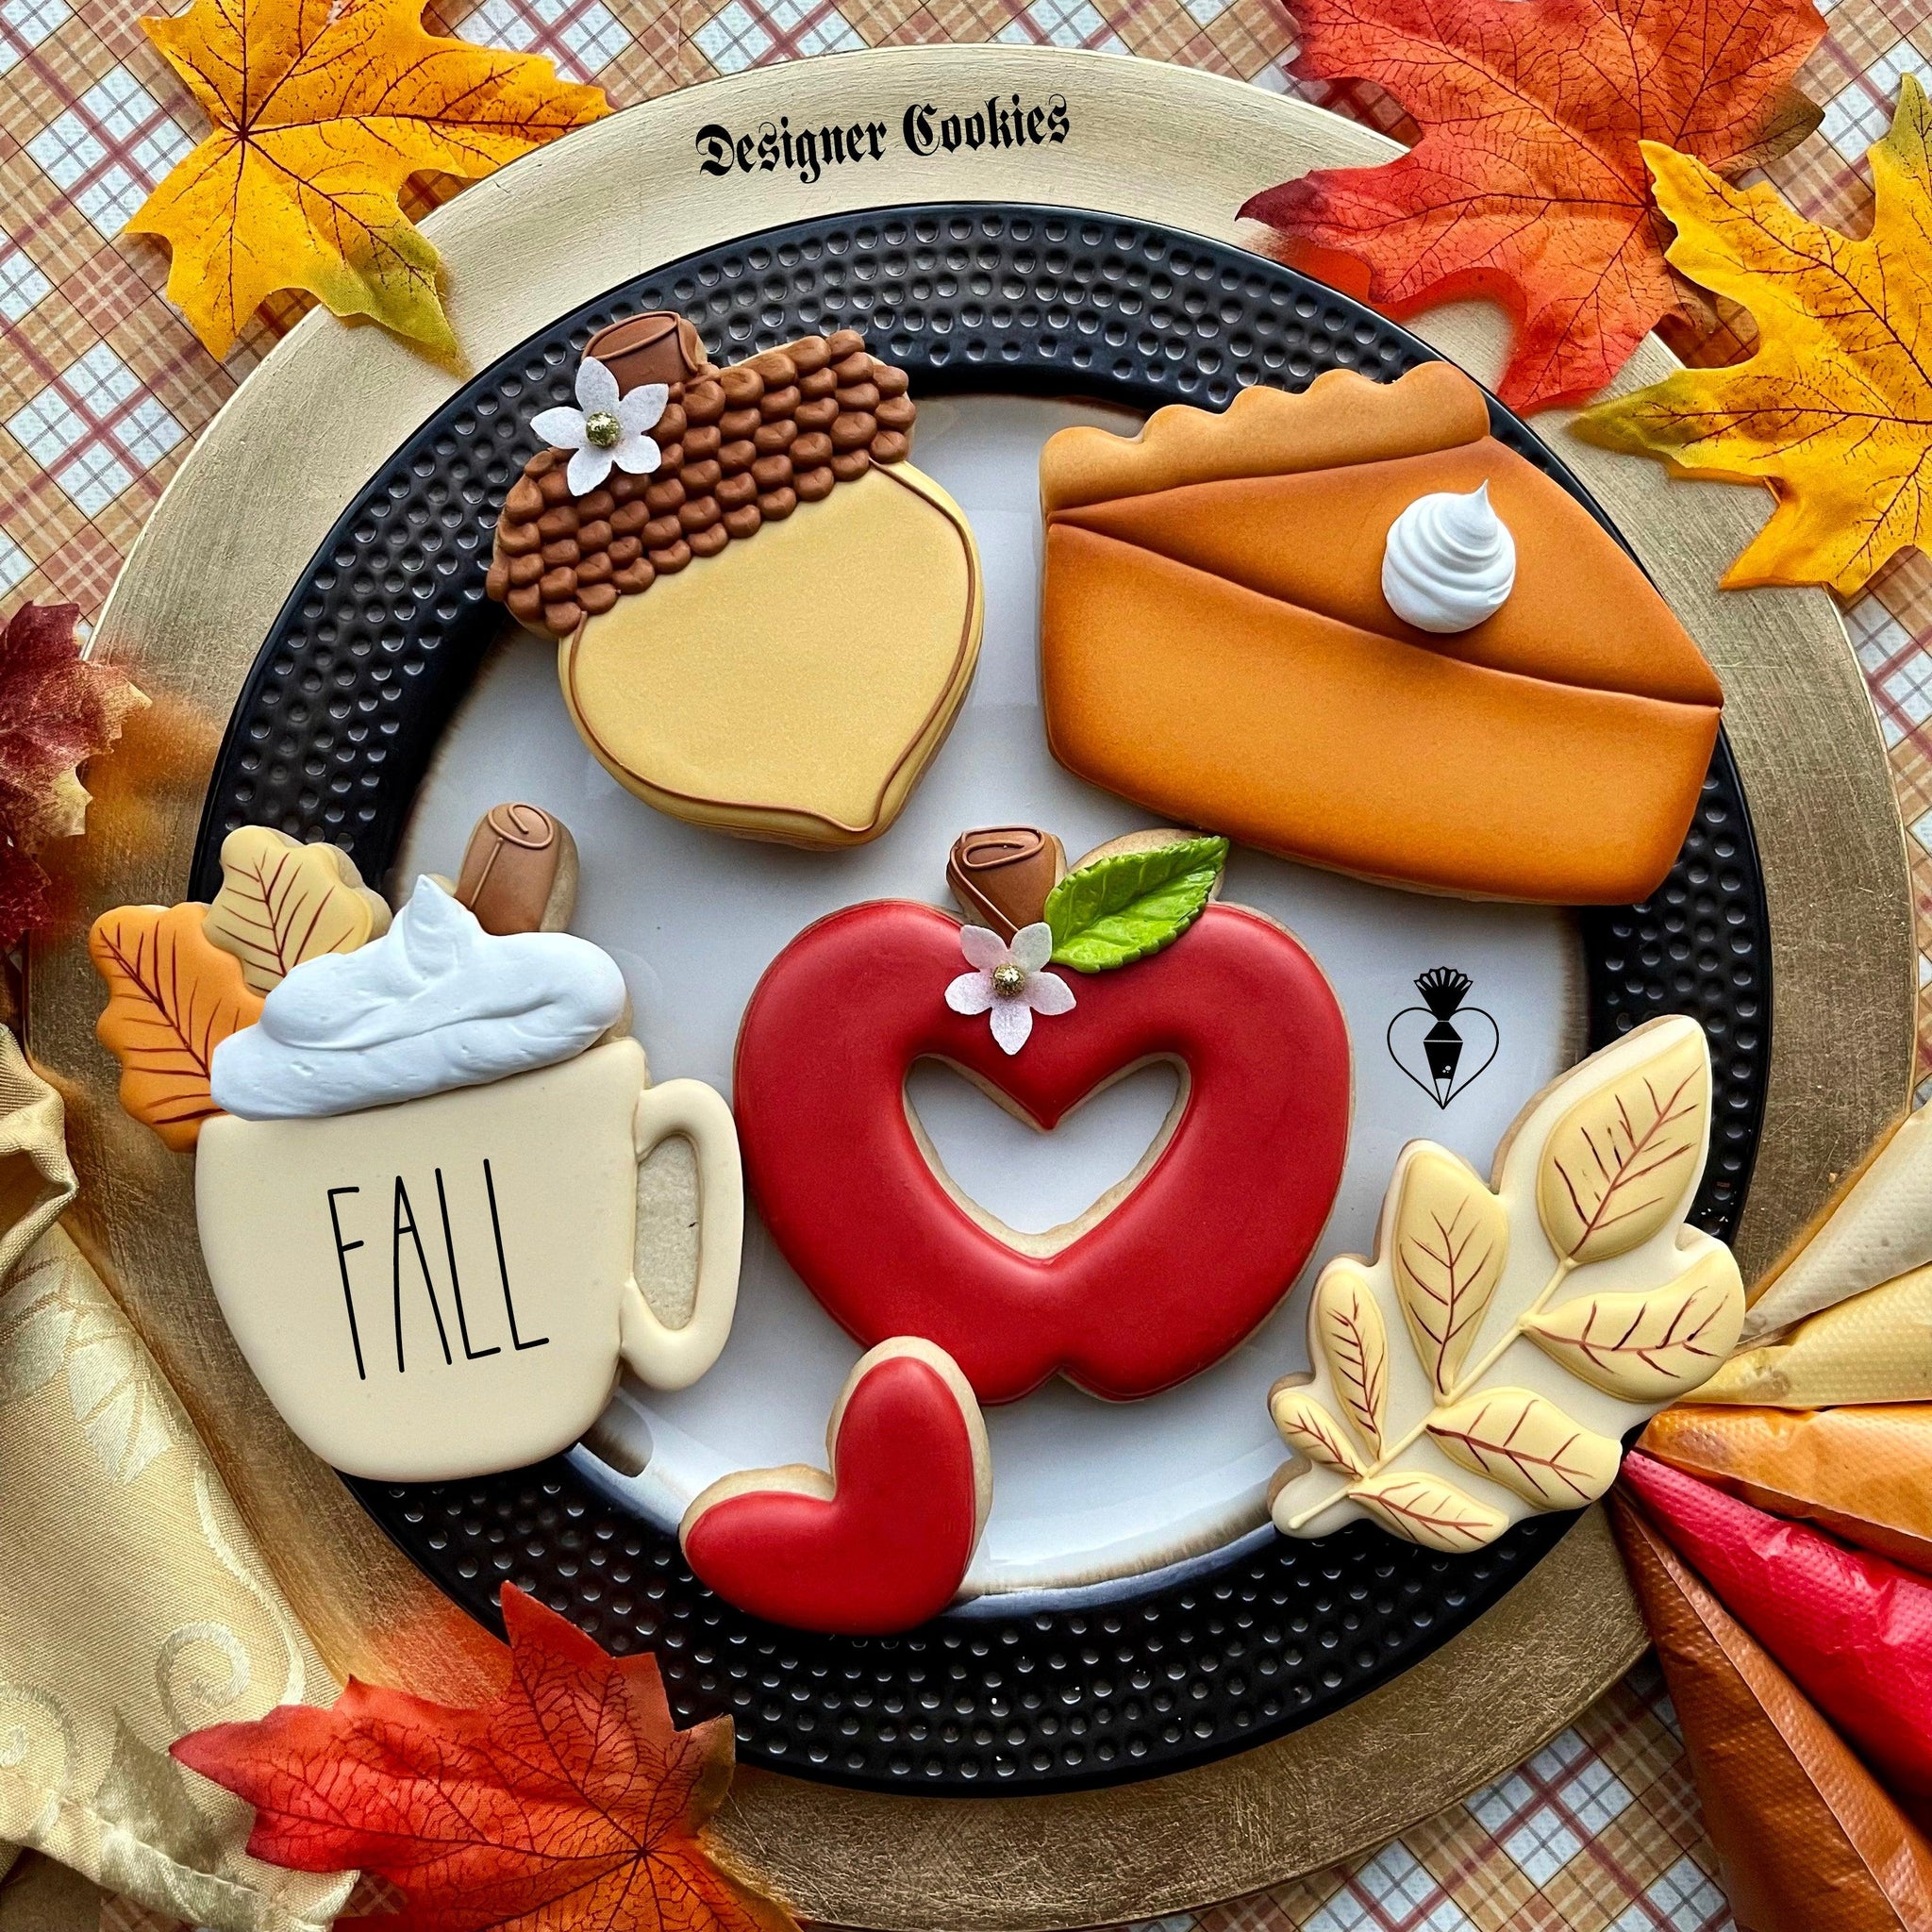 "Happy Fall Y'All" All-Levels Cookie Decorating Class - Designer Cookies ™ STUDIO